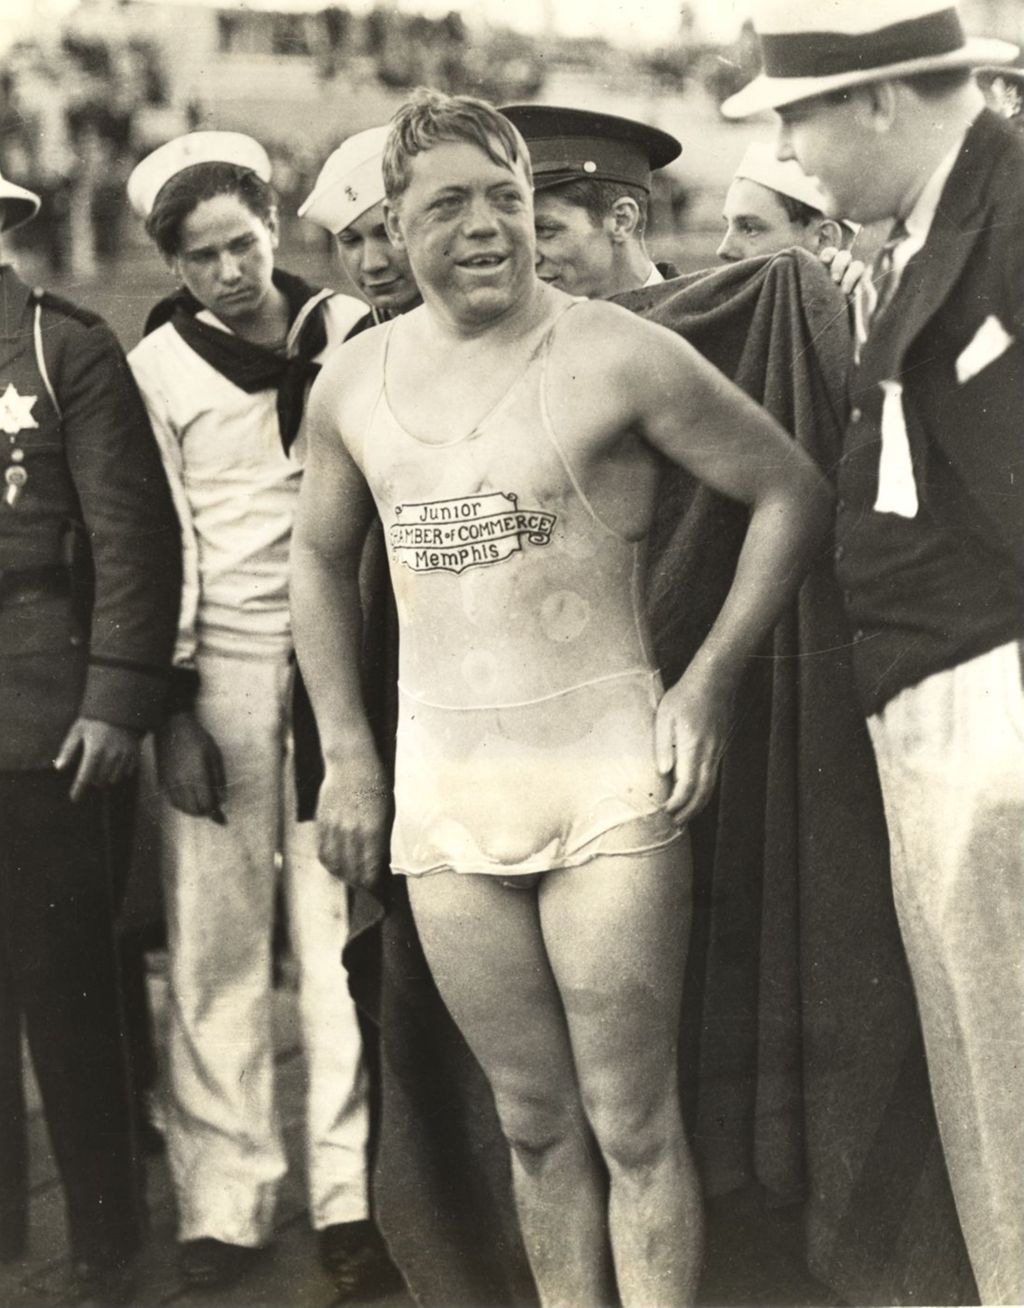 Miniature of George Blagden, long distance swimmer, finishing second in 15 mile marathon at A Century of Progress in 1933